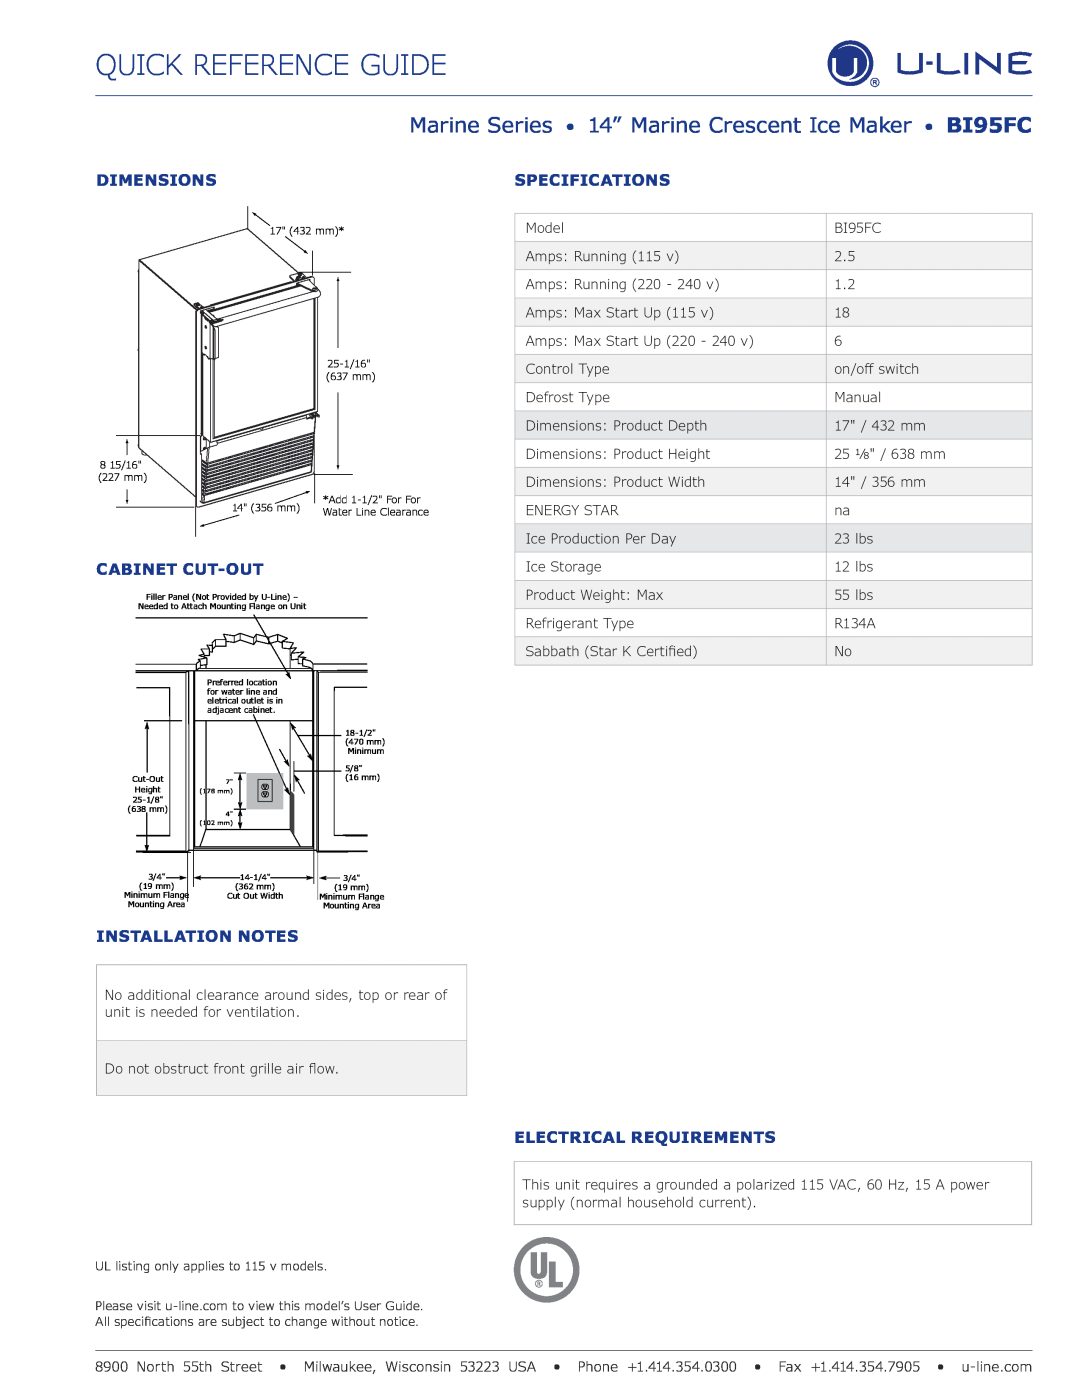 U-Line BI95FC manual Dimensions, Cabinet Cut-Out, Specifications, Installation Notes, Electrical Requirements 